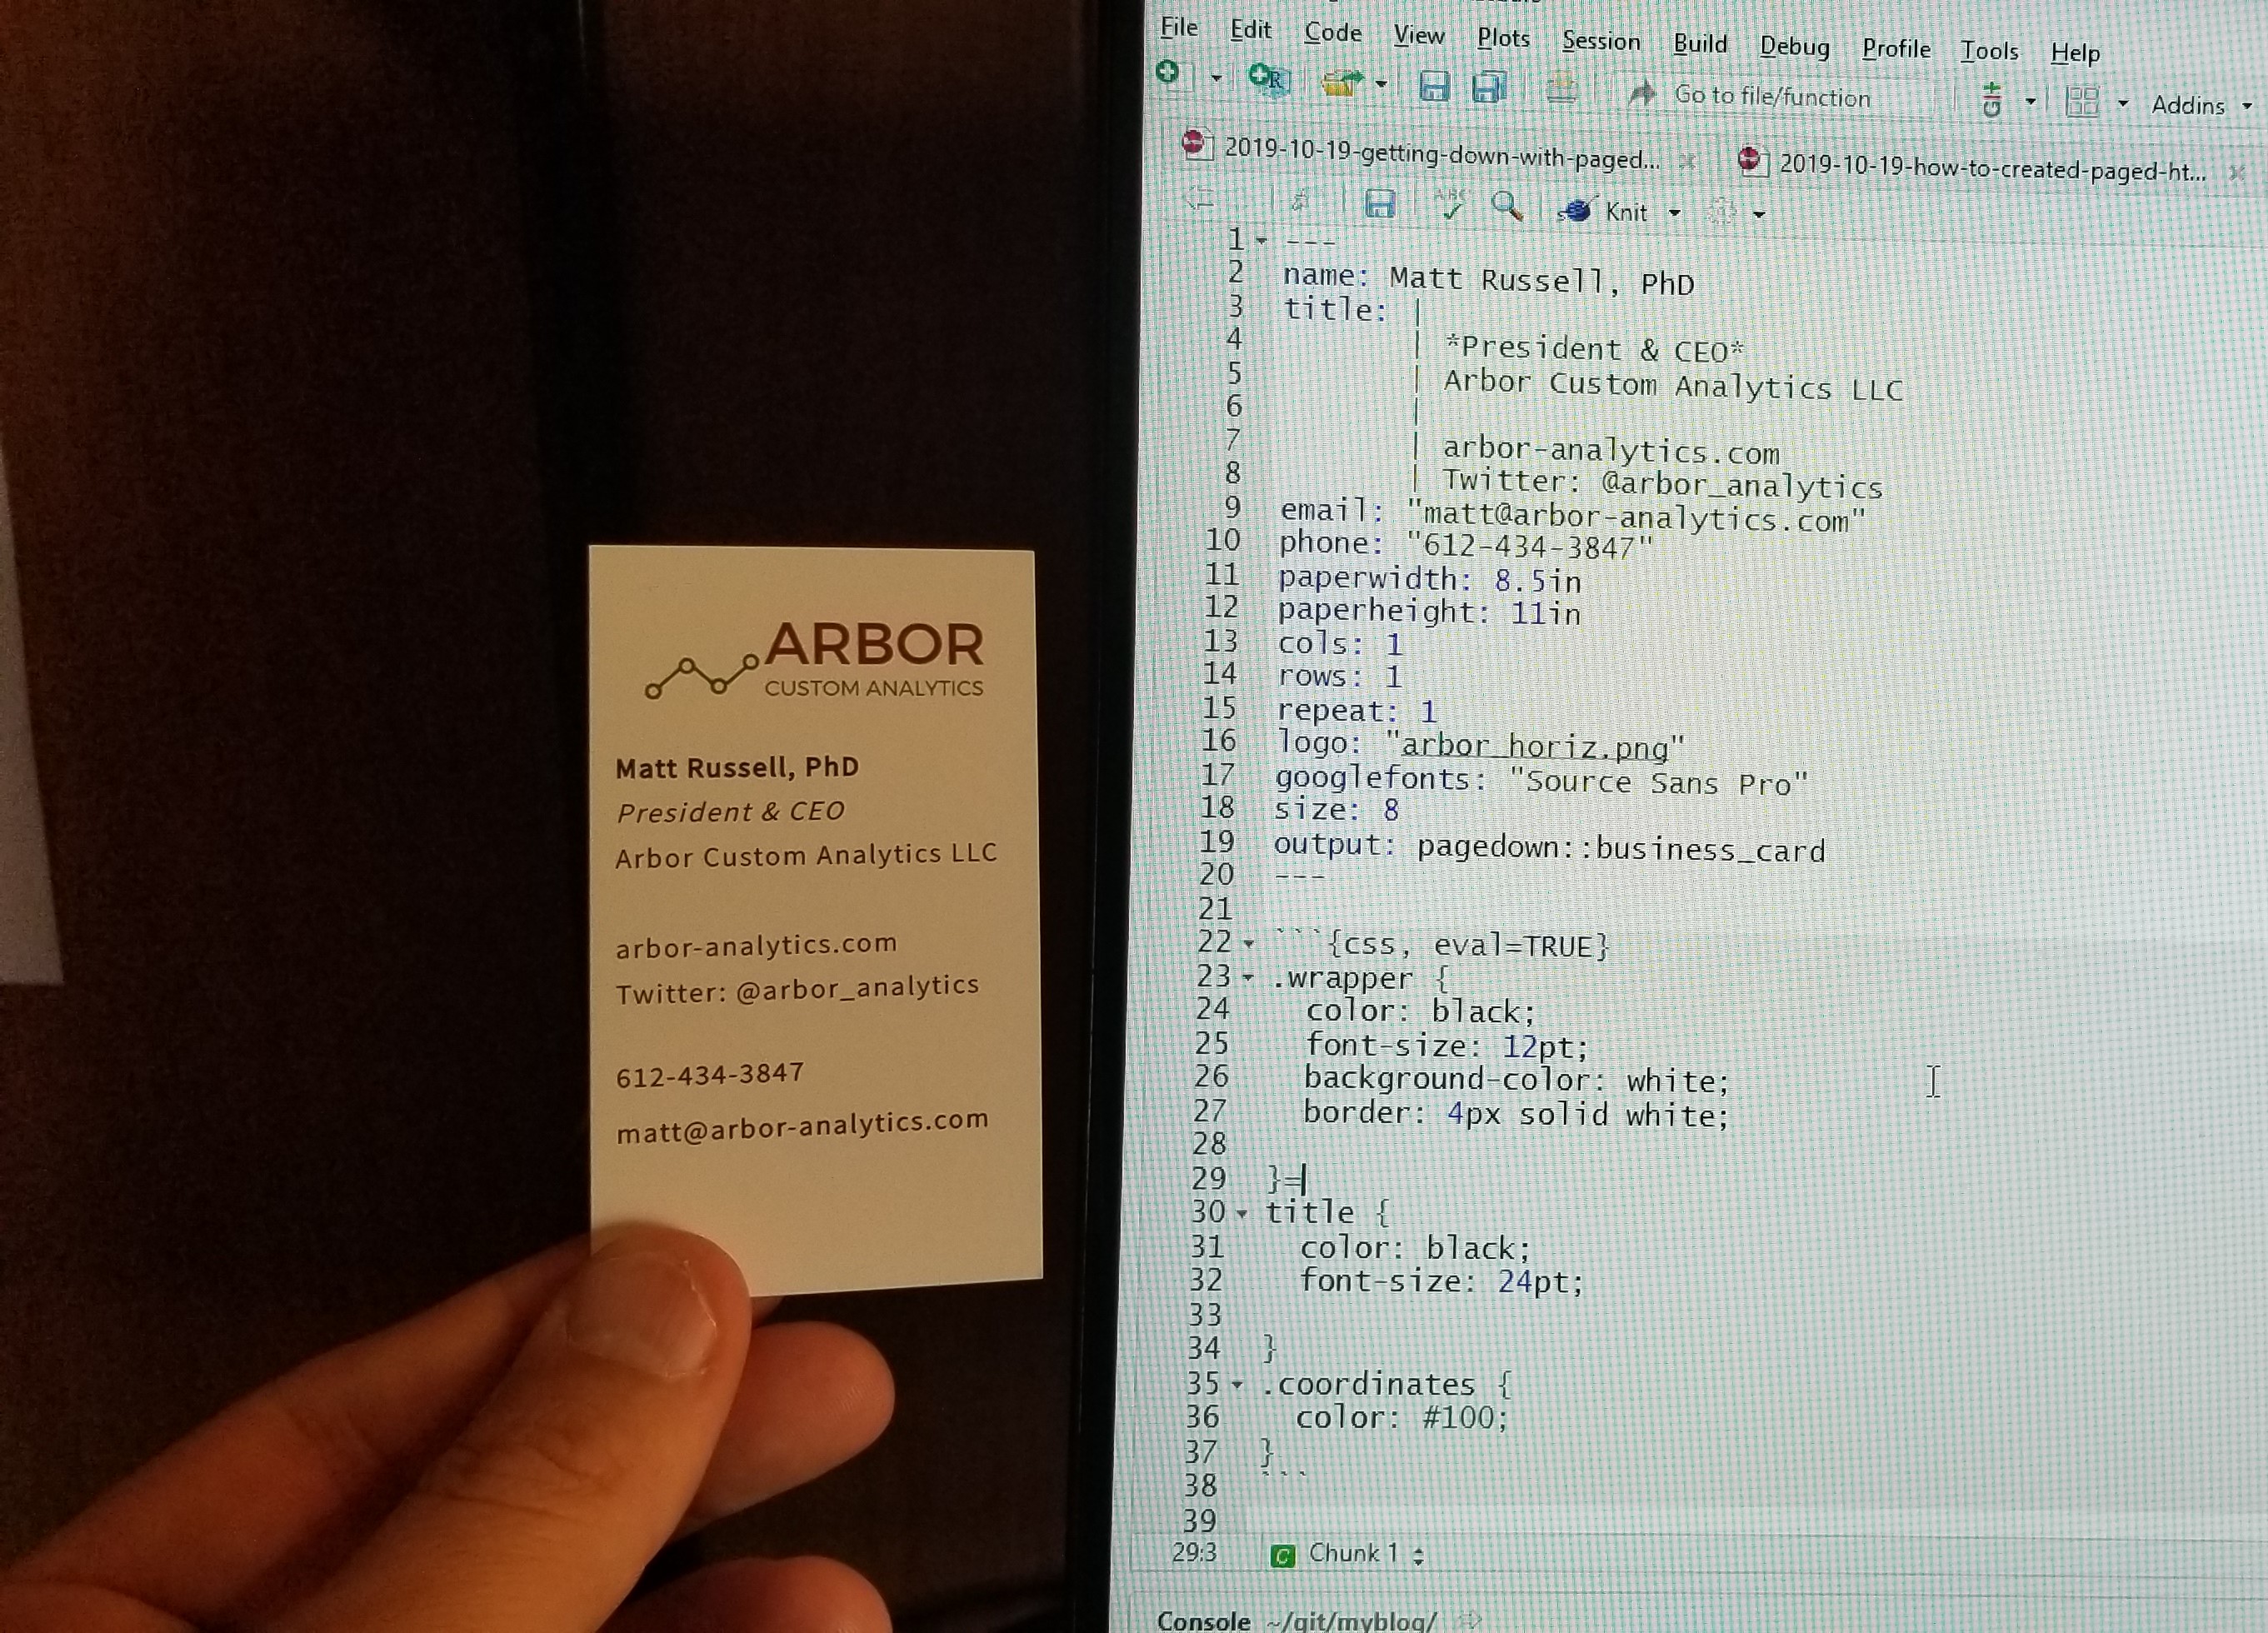 Matt’s business card and code created with pagedown.